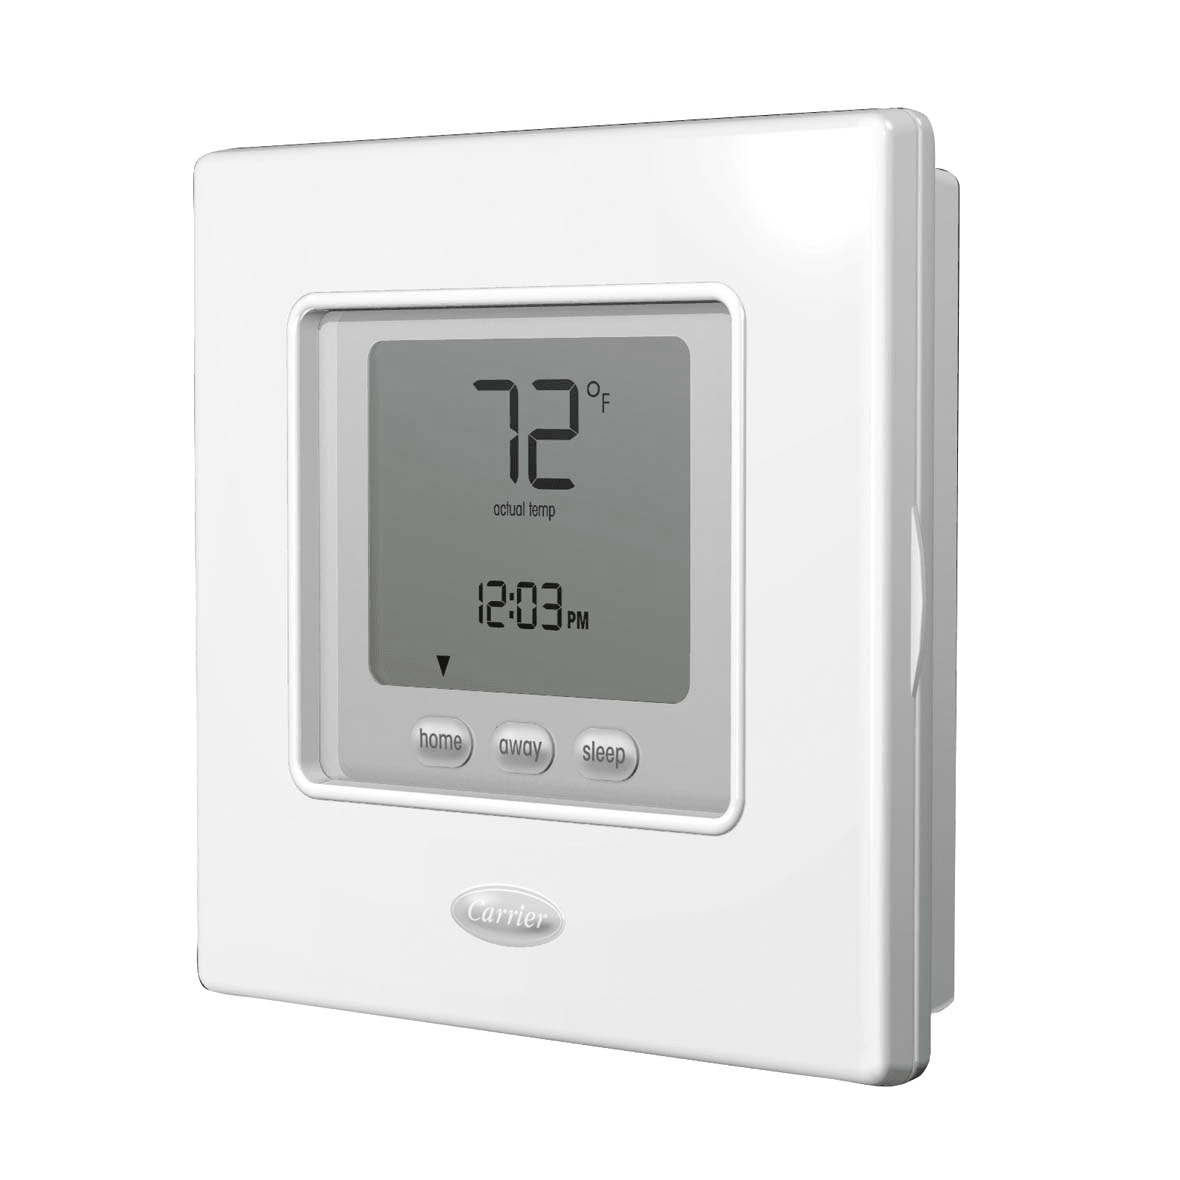 comfort-programmable-heat-pump-thermostat-TC-PHP01